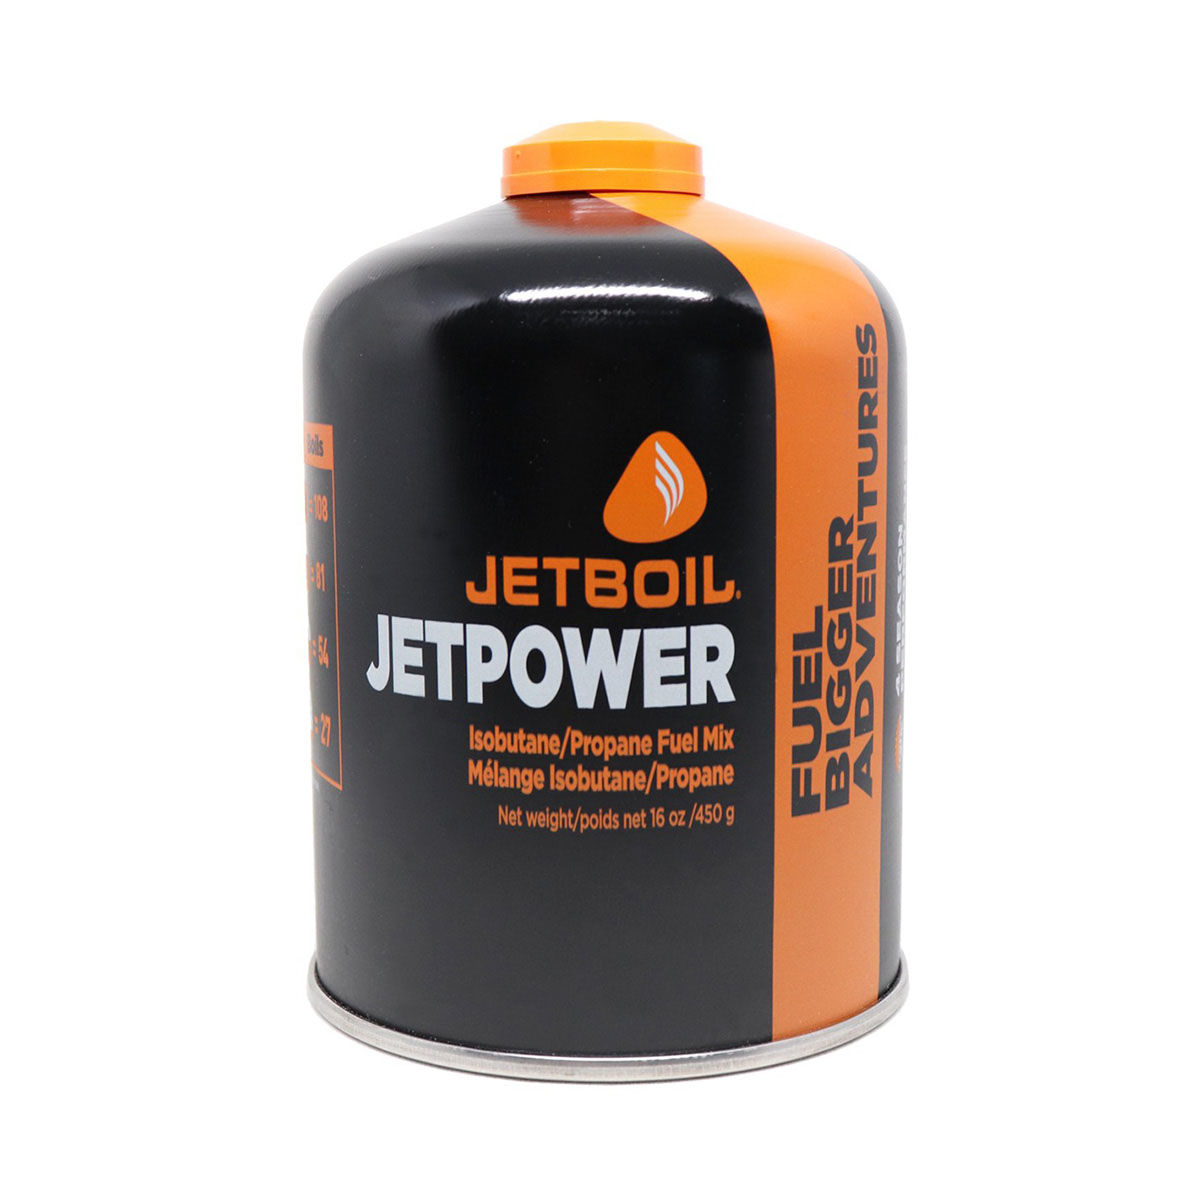 Jetboil JetPower gas canister - 450g